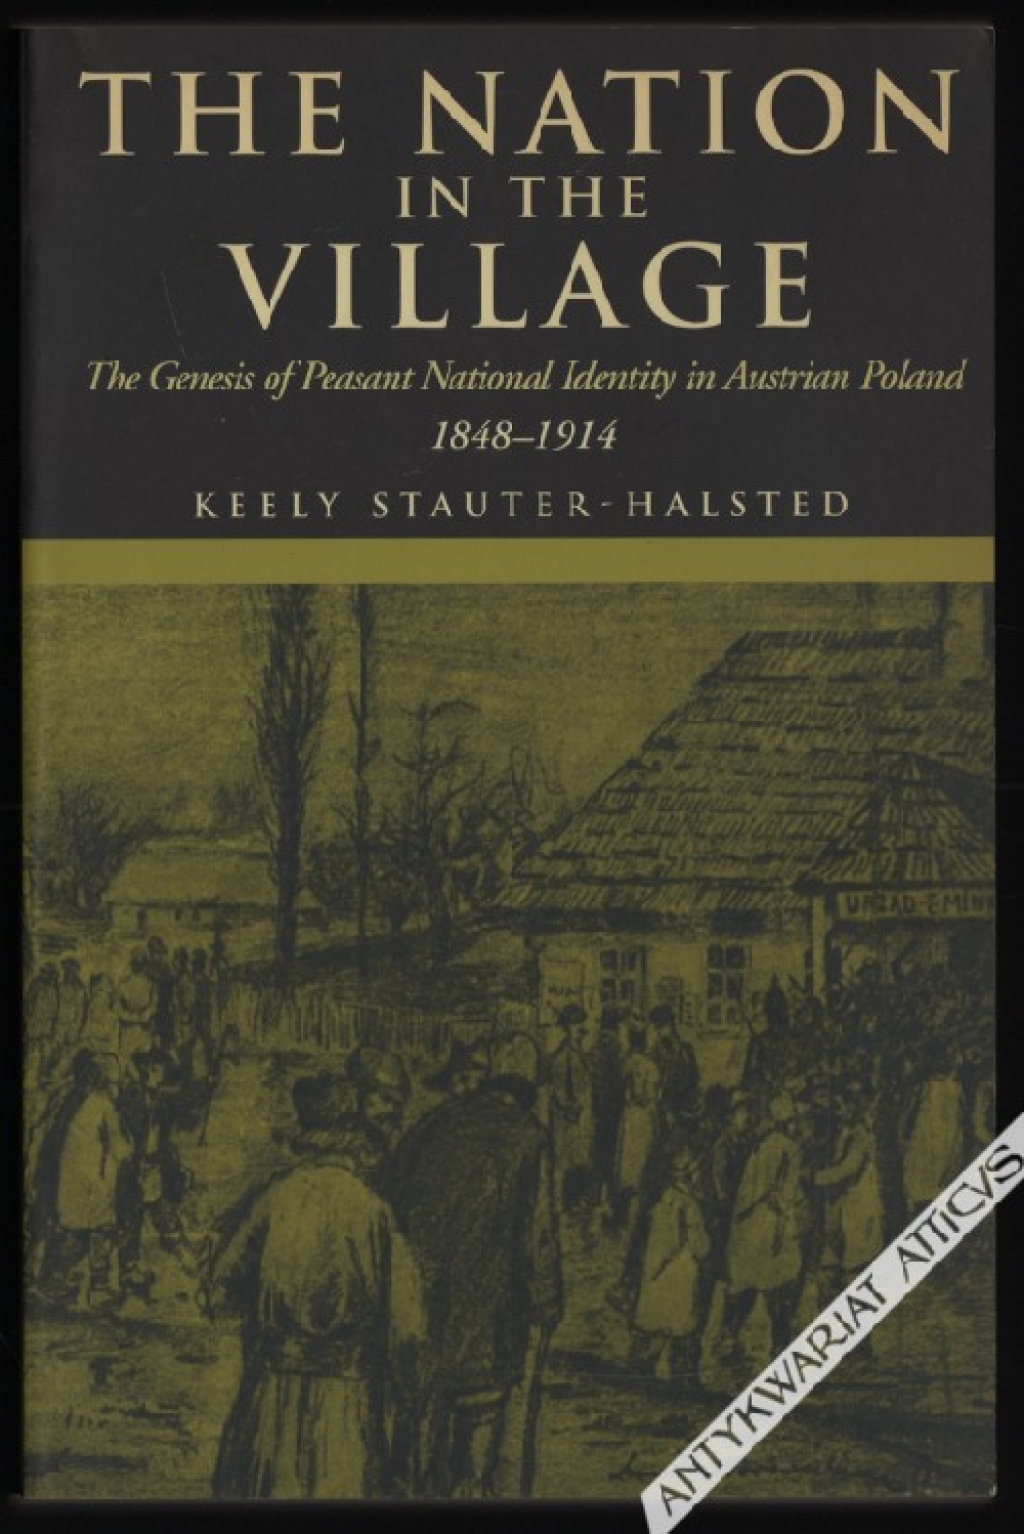 The Nation in the Village. The Genesis of Peasant National Identity in Austrian Poland, 1848-1914